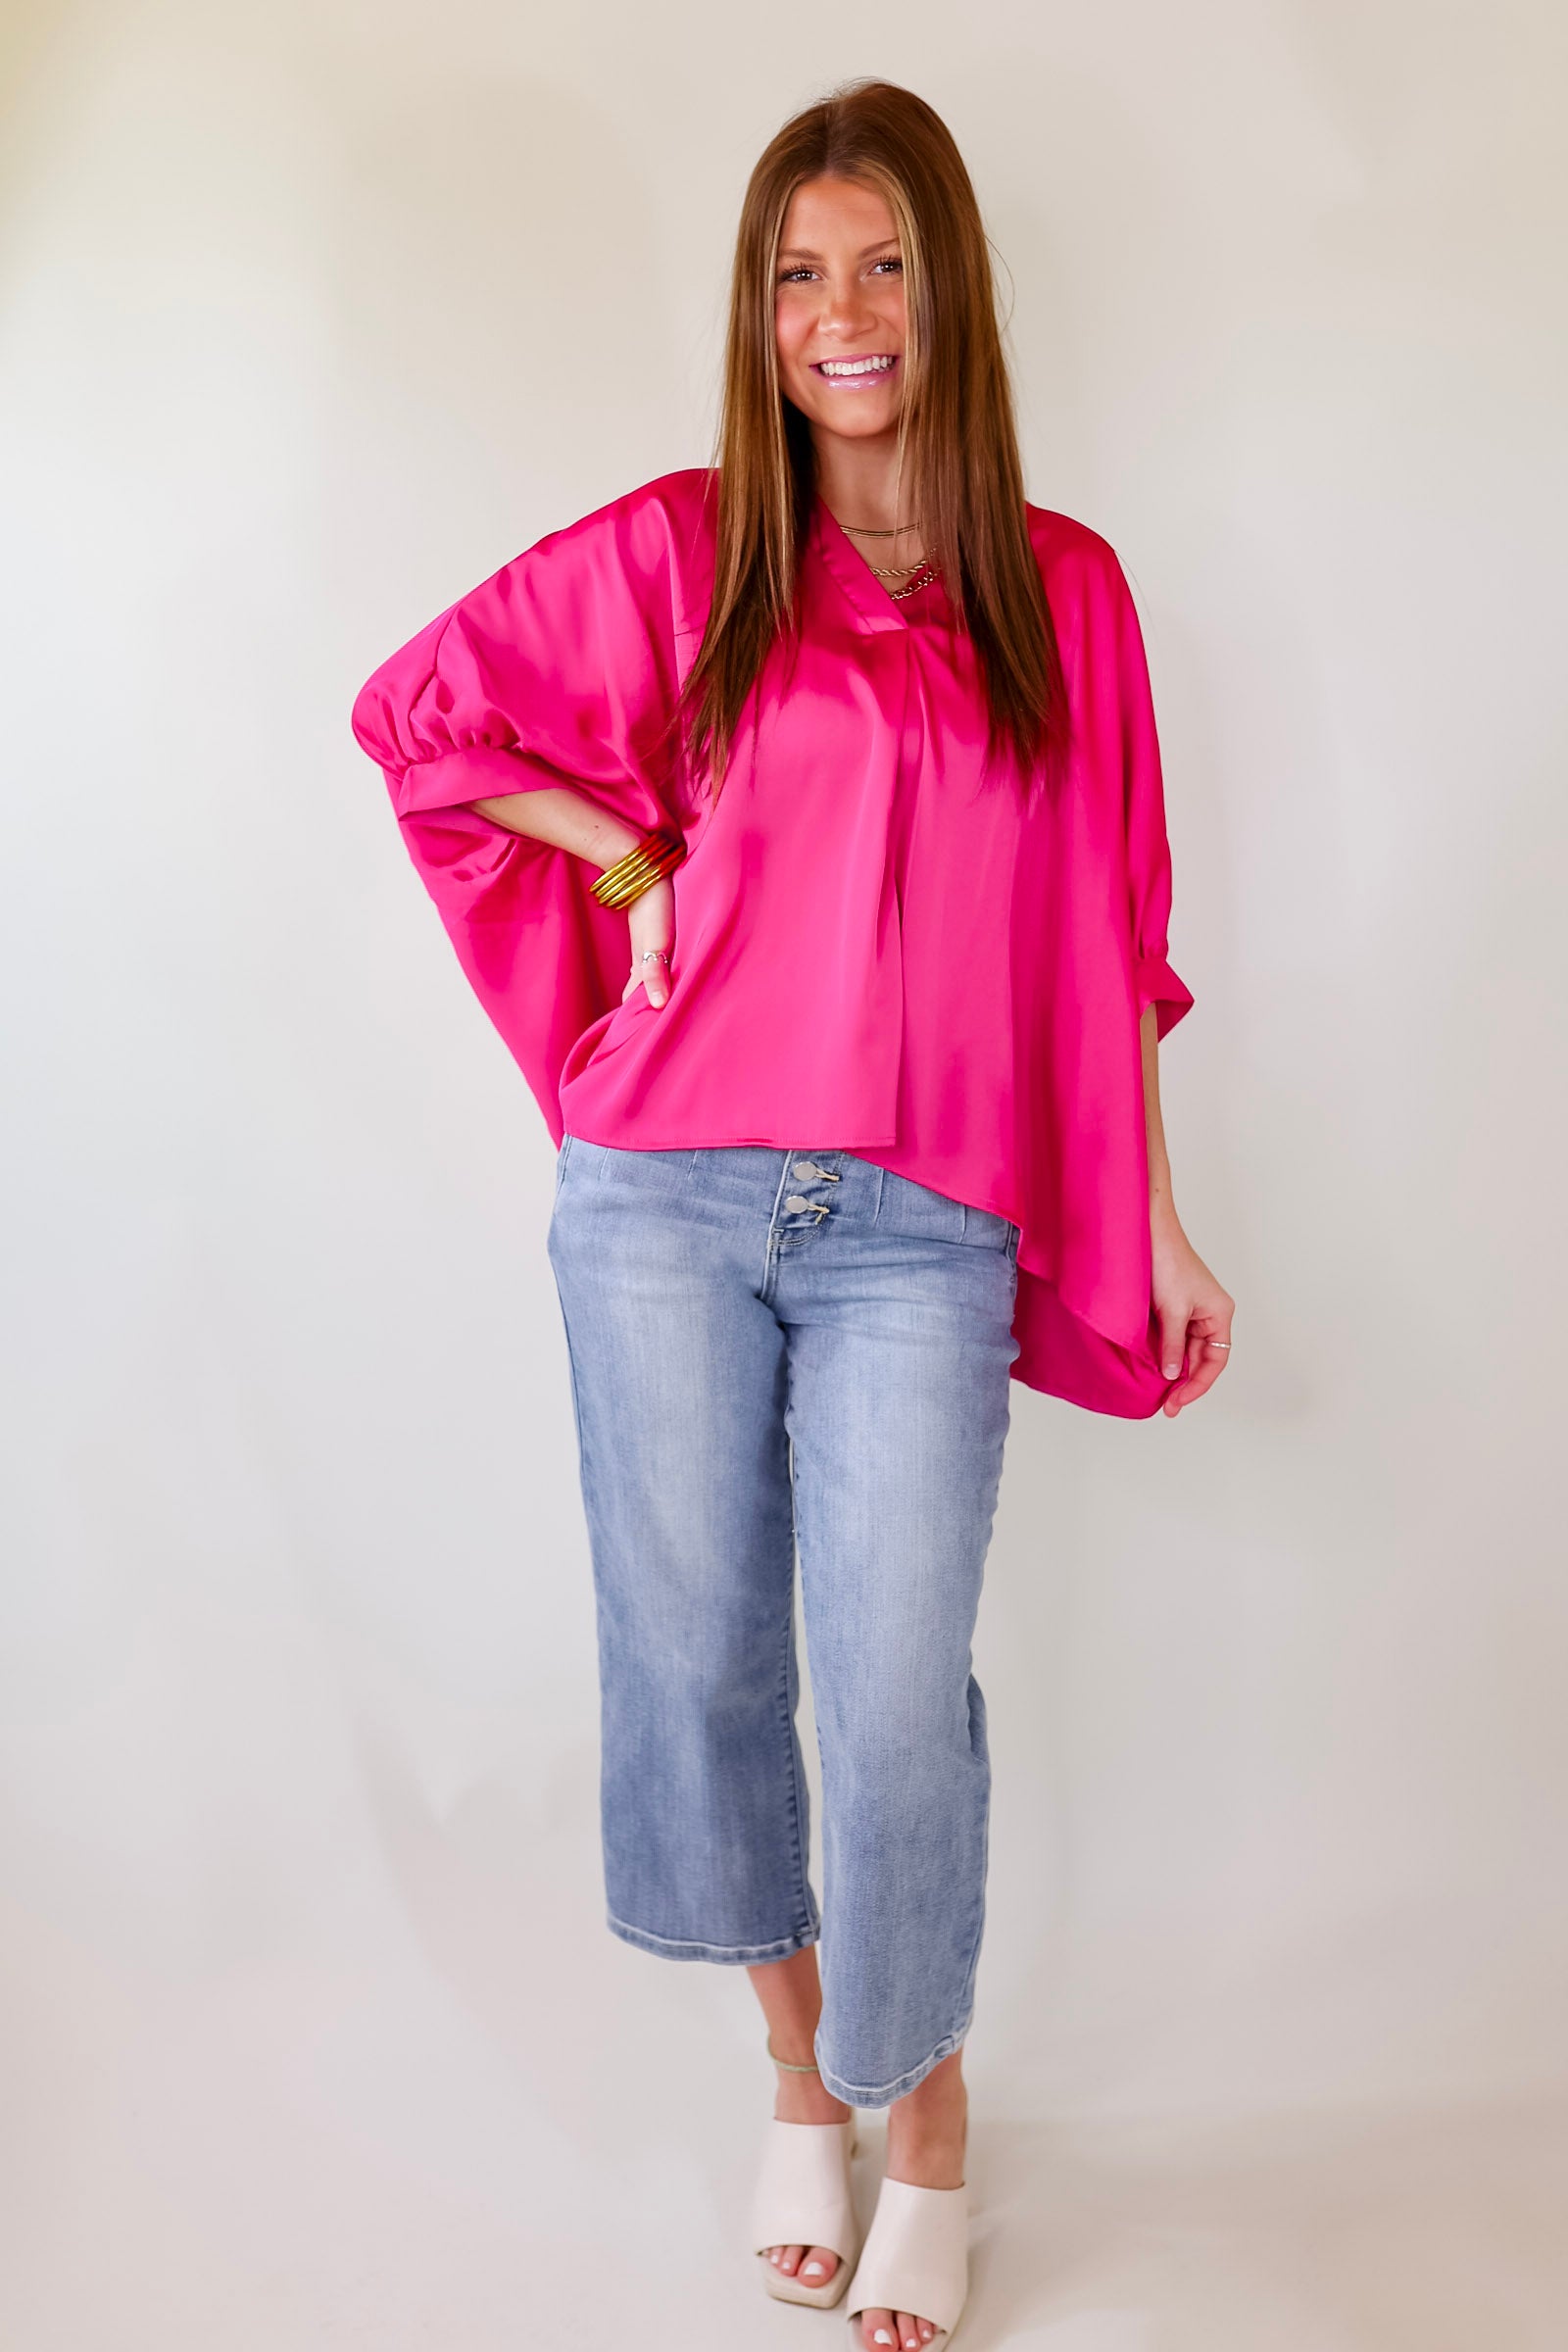 Irresistibly Chic Half Sleeve Oversized Blouse in Fuchsia Pink - Giddy Up Glamour Boutique